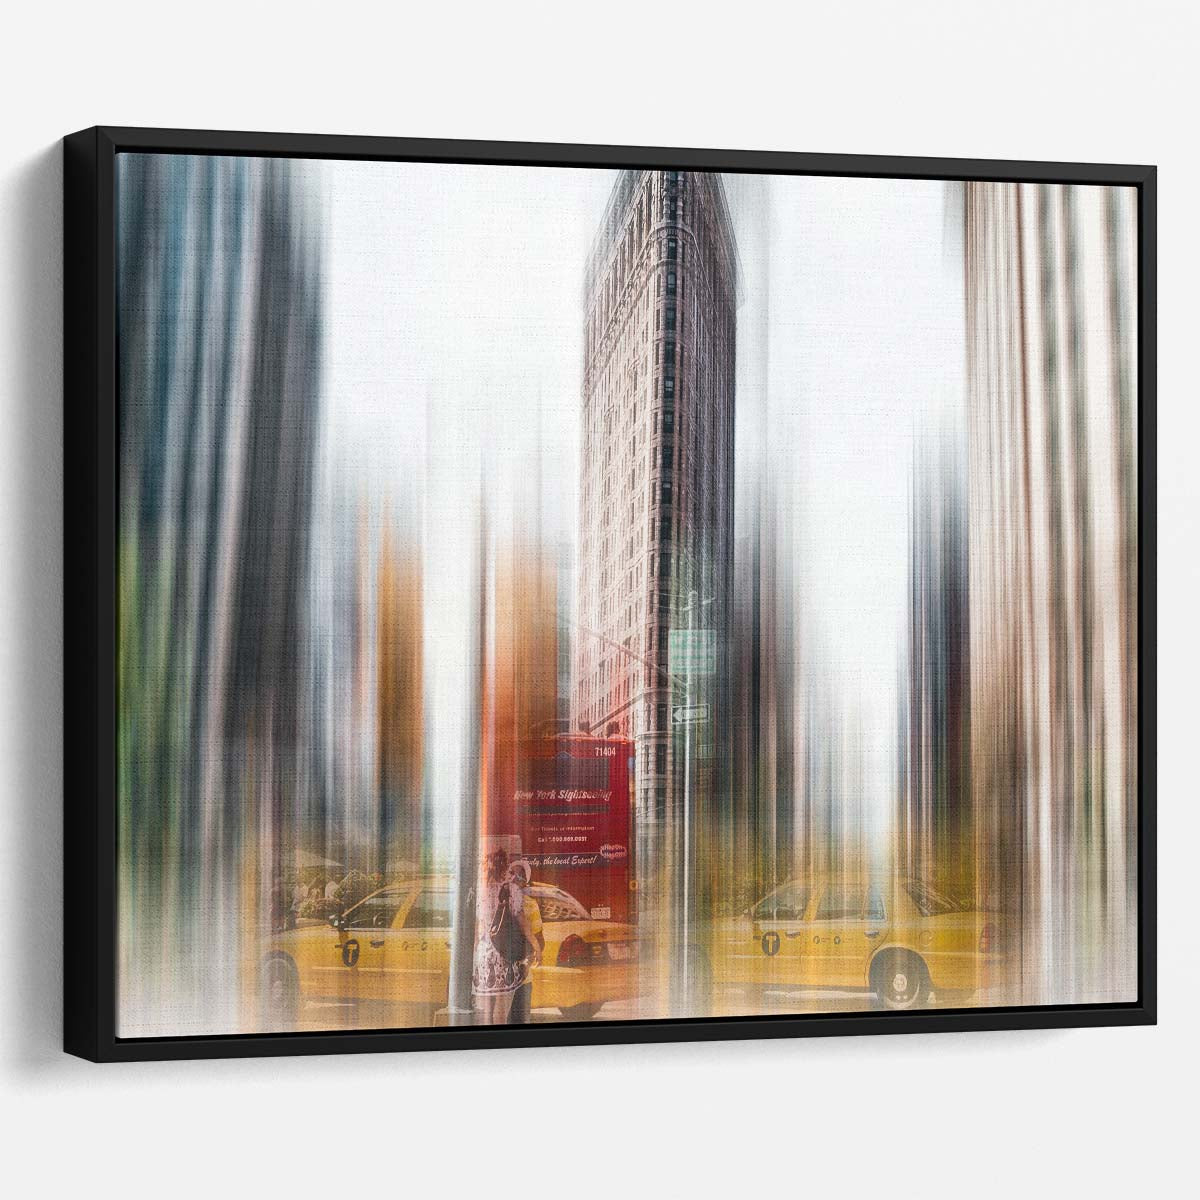 Iconic NYC Flatiron Building Blurry Cityscape Wall Art by Luxuriance Designs. Made in USA.